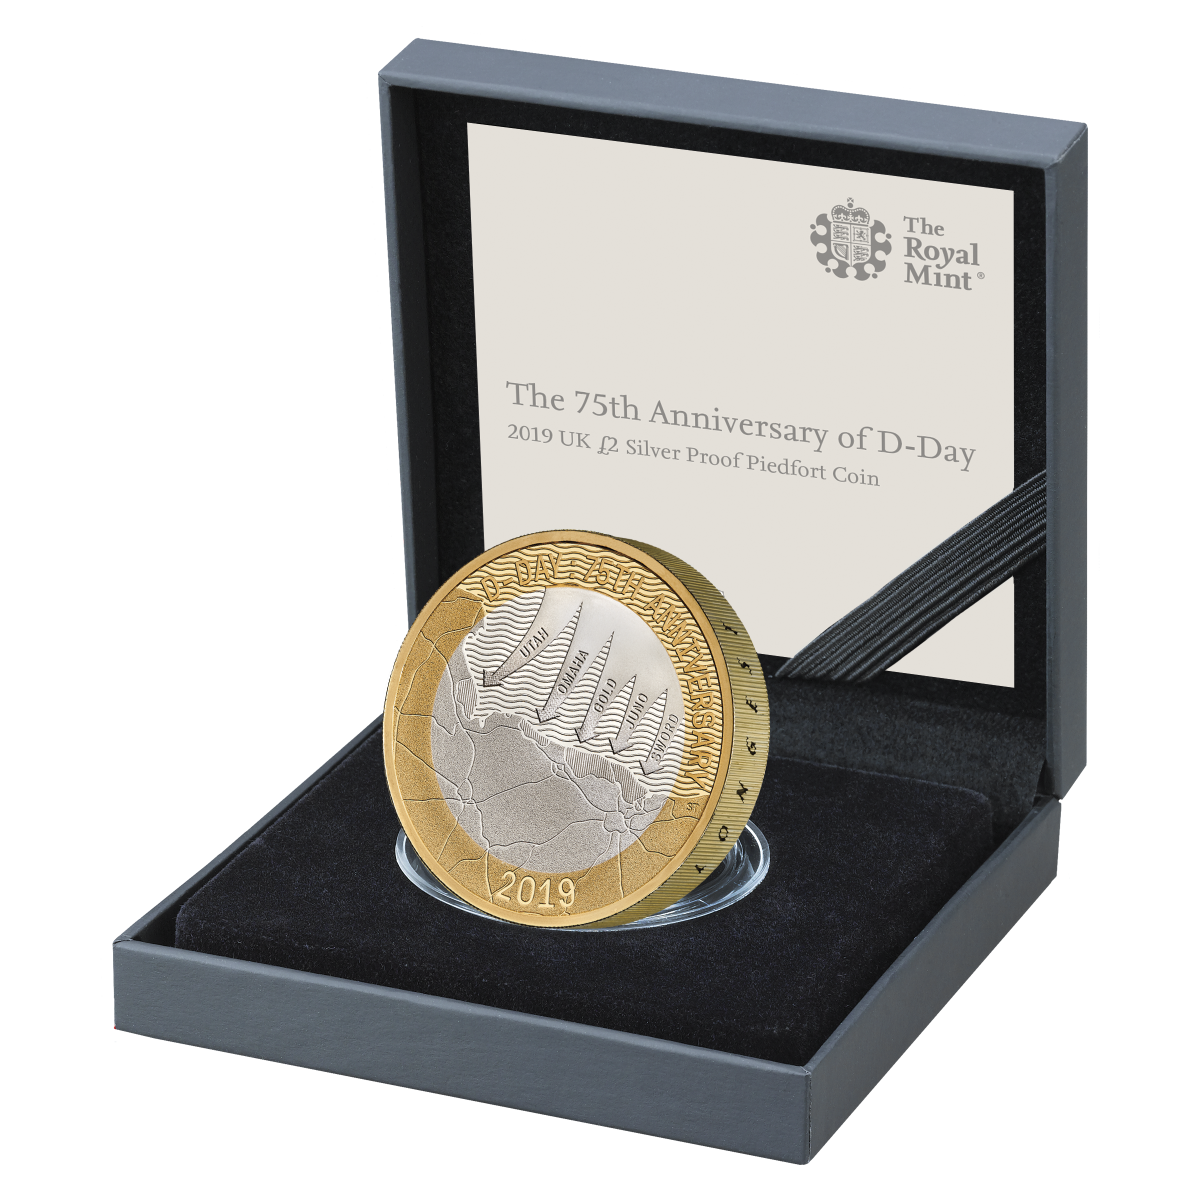 The D-Day commemorative coins will be available in Gold and Silver Proof, Silver Proof Piedfort and Brilliant Uncirculated finishes.